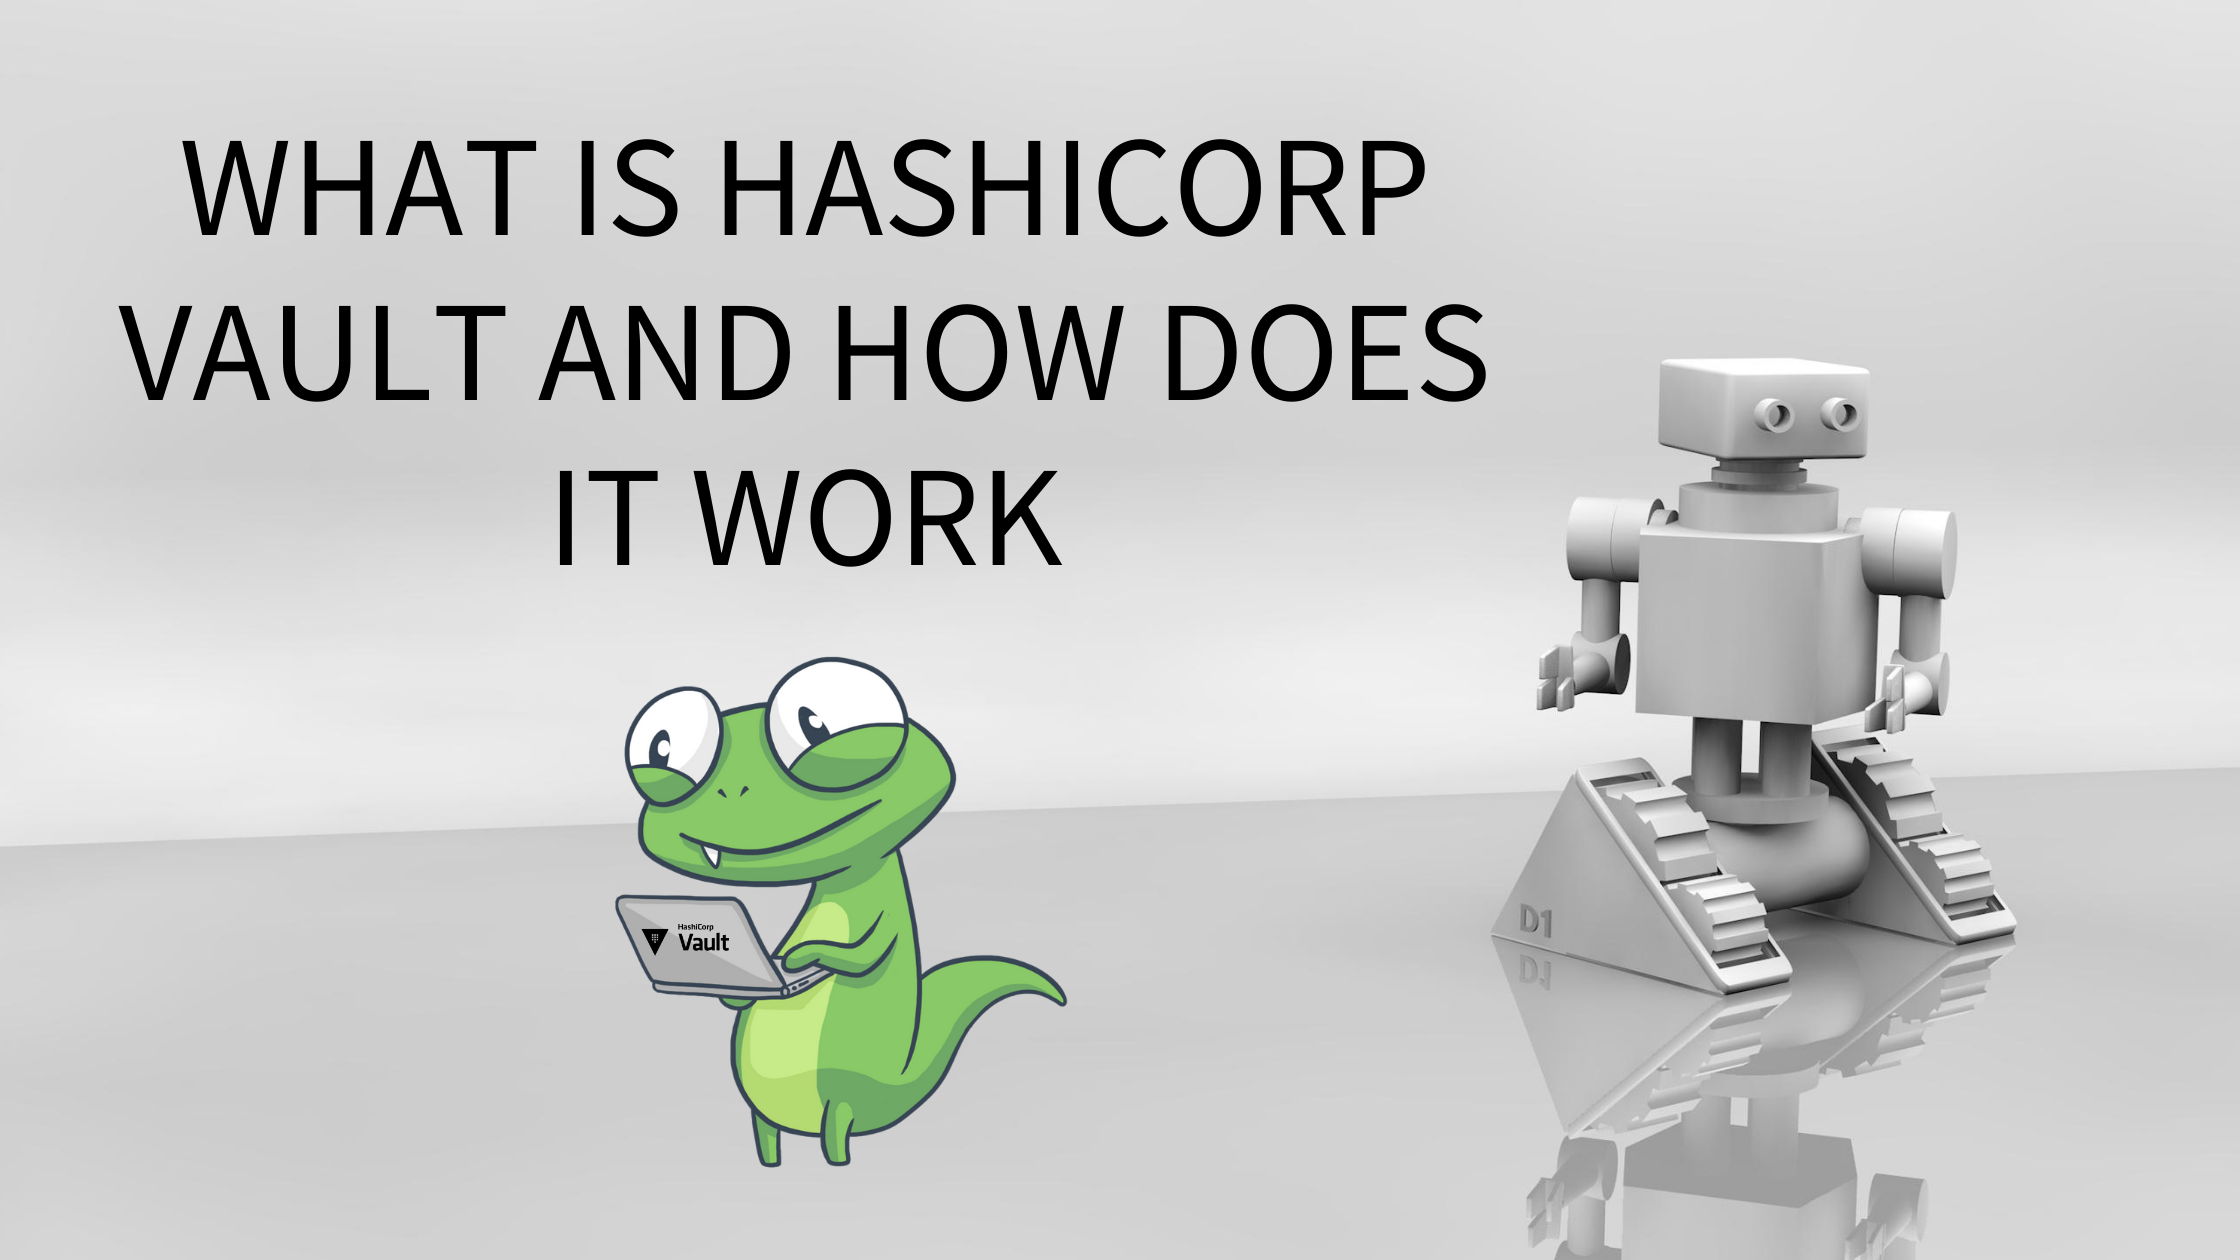 What is HashiCorp Vault and how does it work?